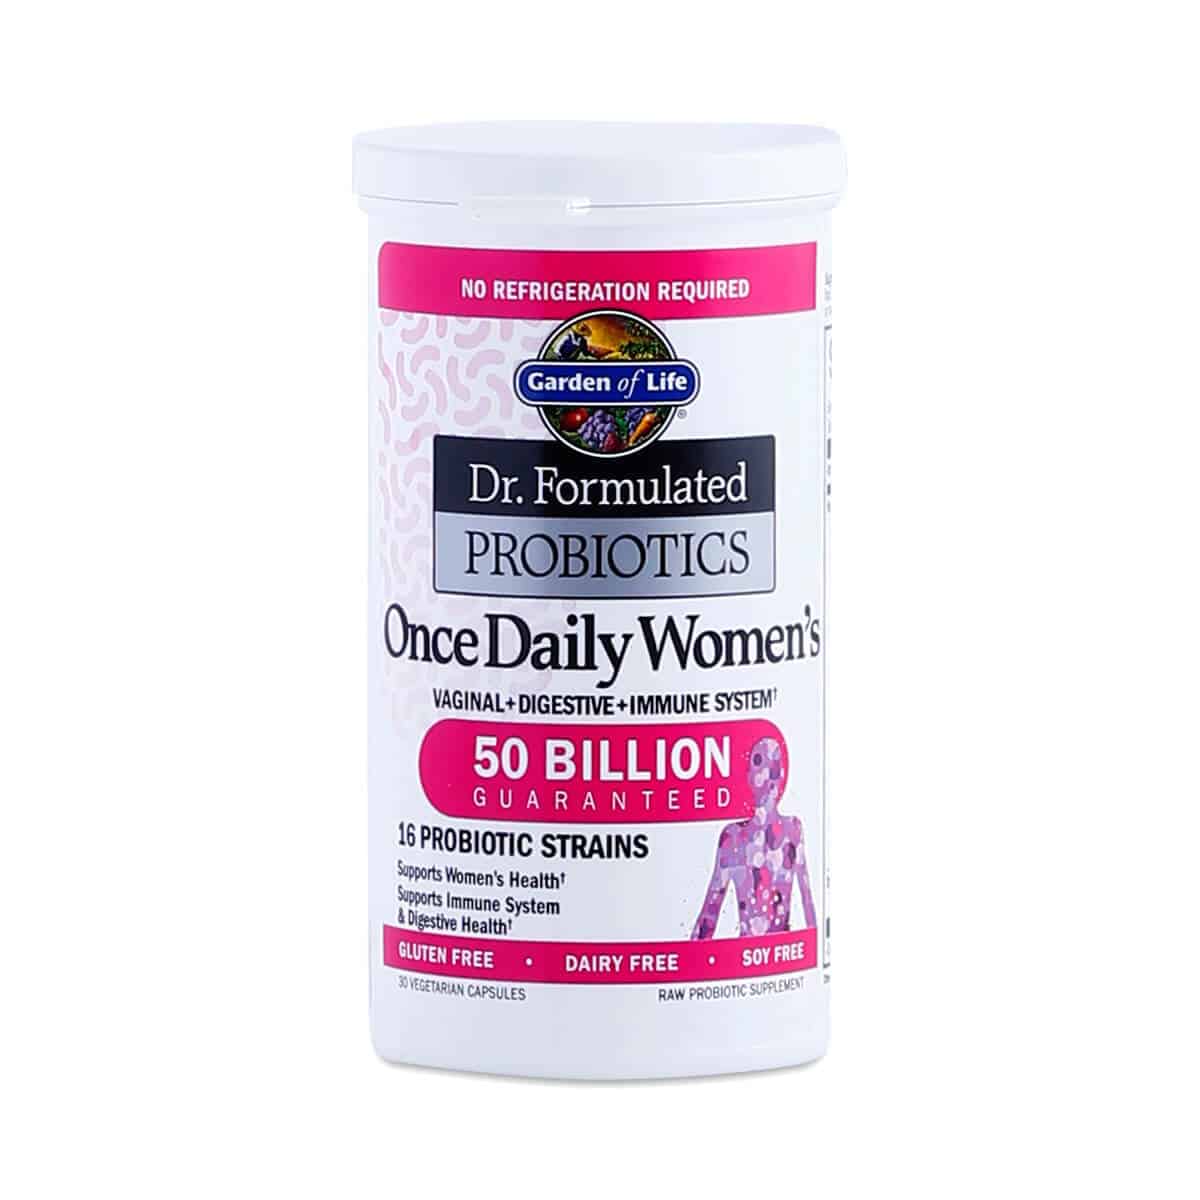 Once Daily Women's Probiotic